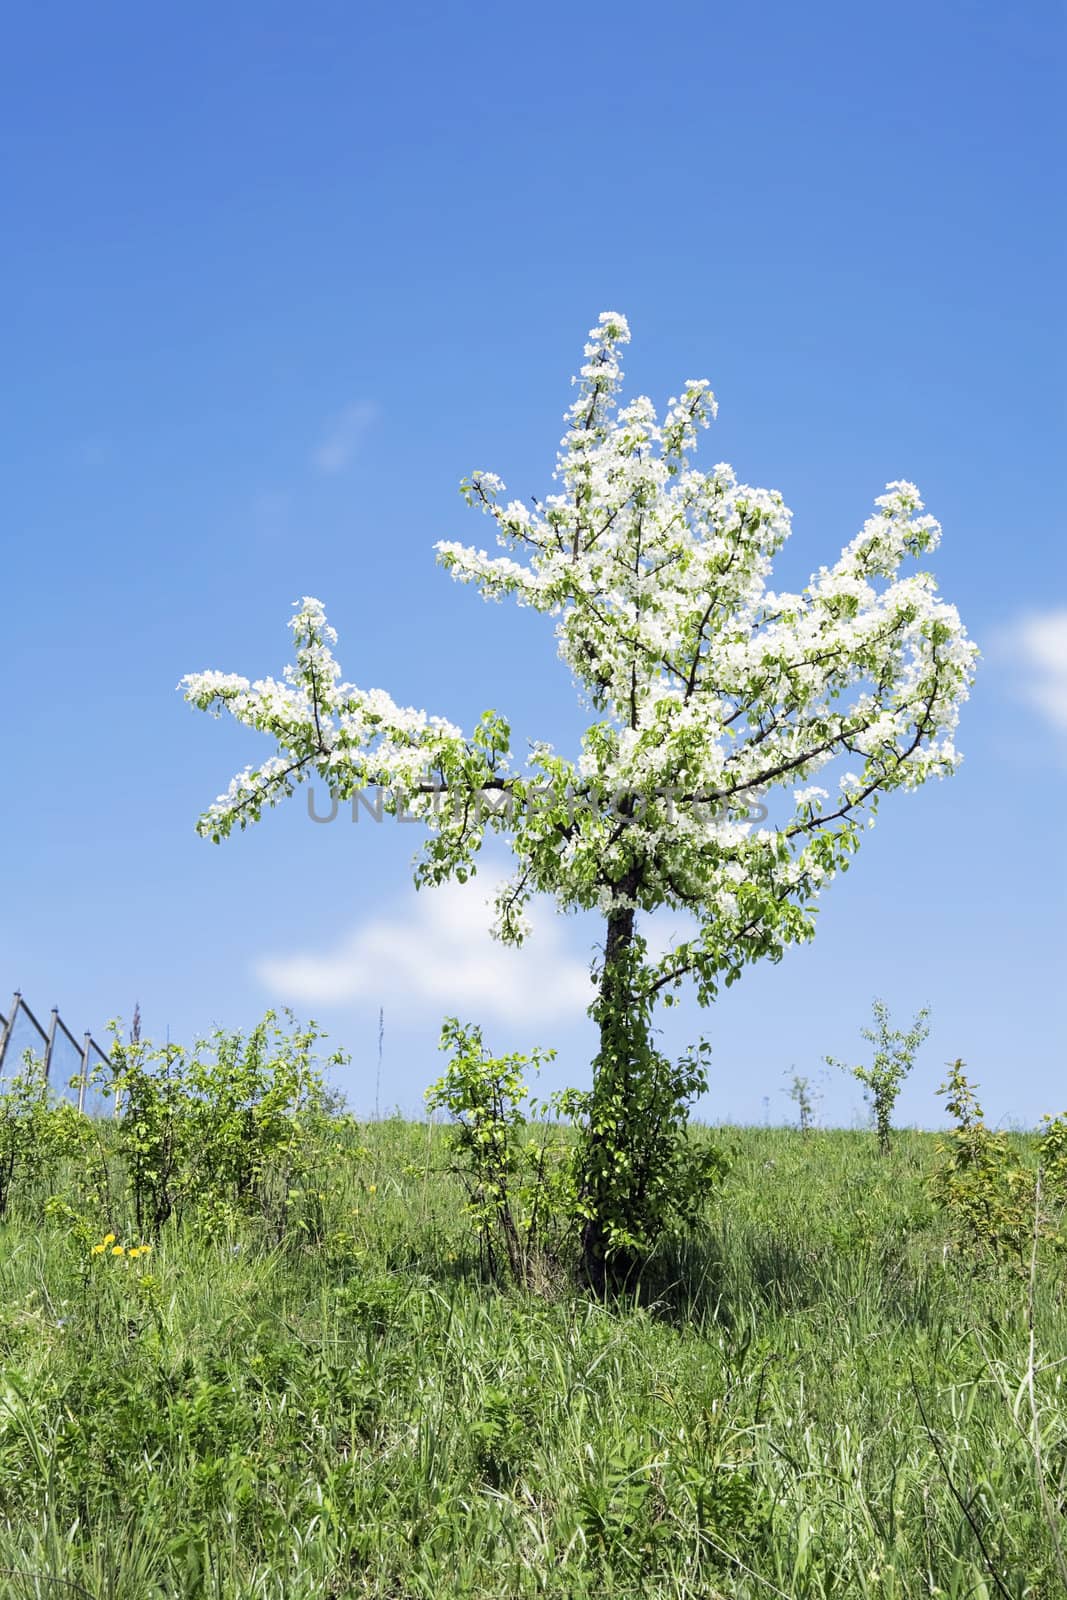 Lonely blossoming tree with white flowers during a spring season